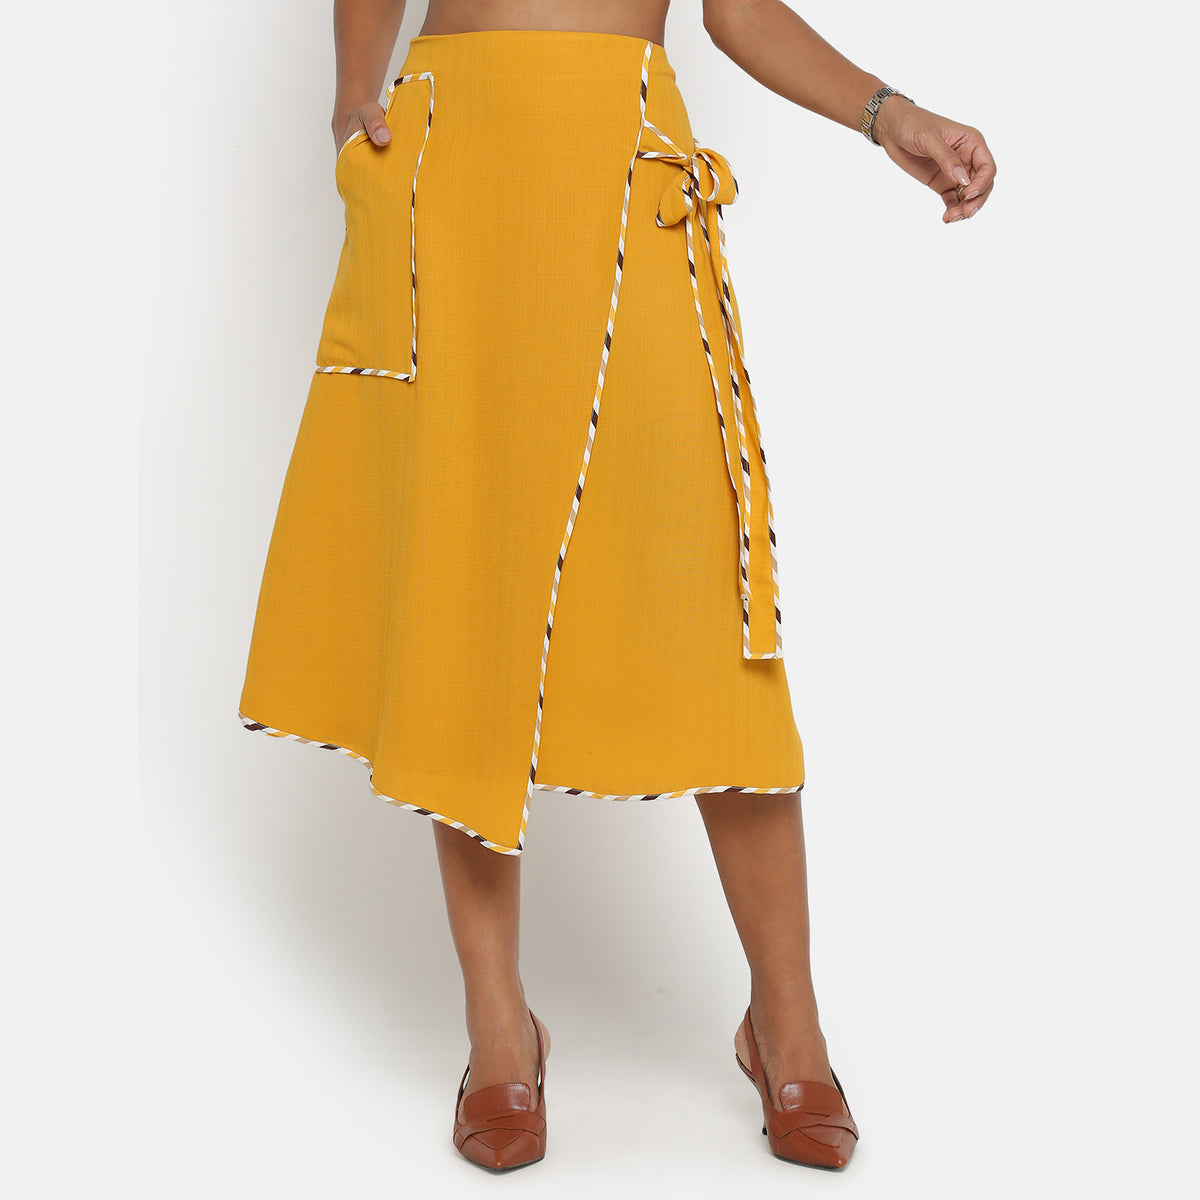 Yellow asymmetrical skirt with contrast piping